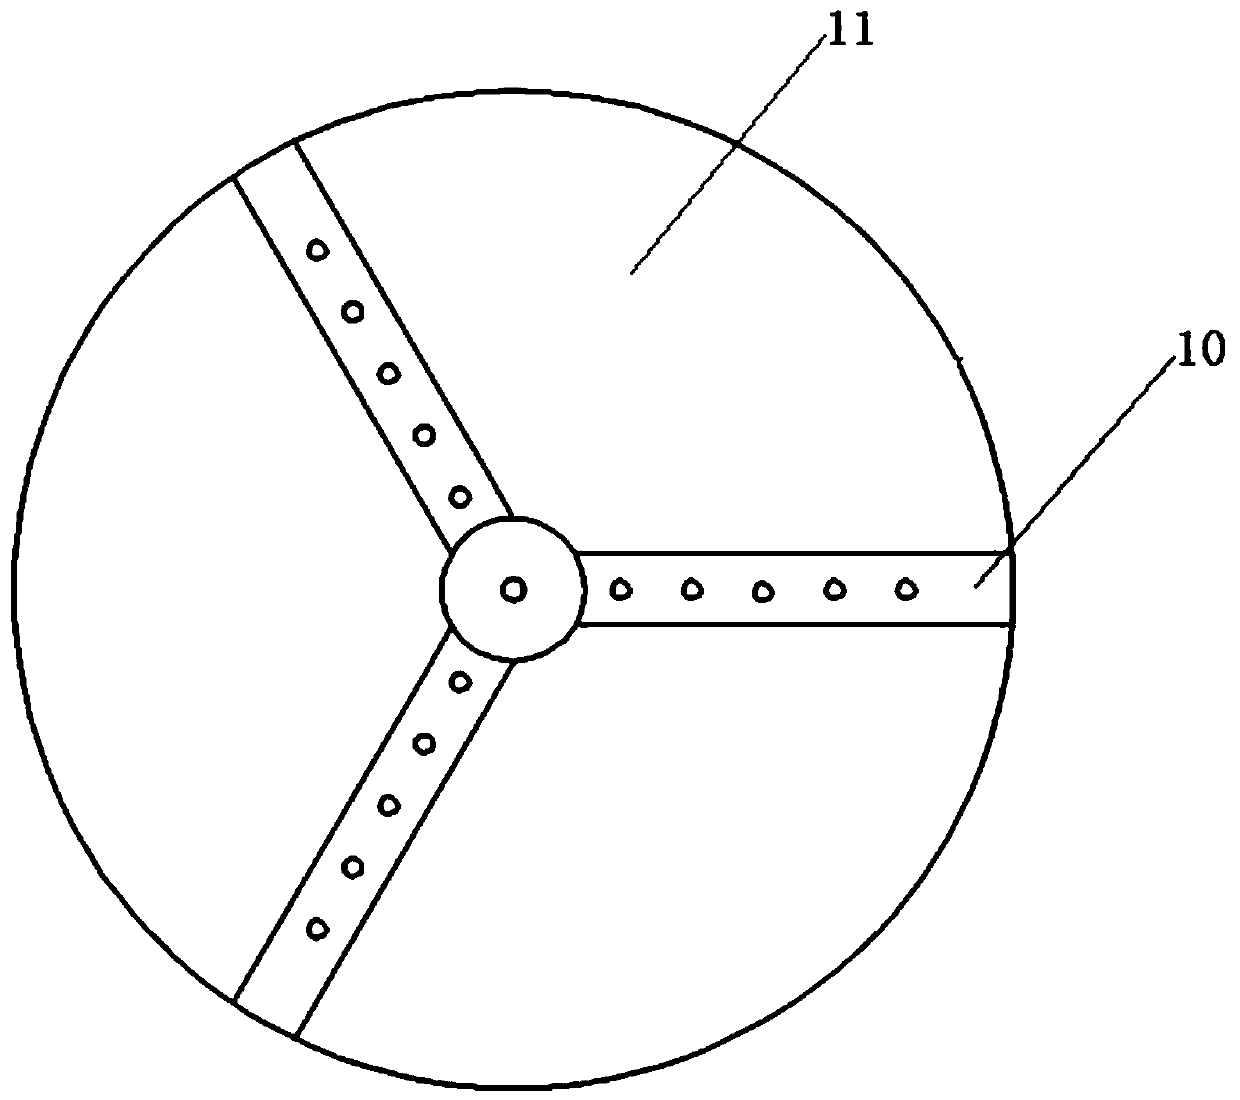 Vibrational finishing machining method for high-temperature alloy disc parts